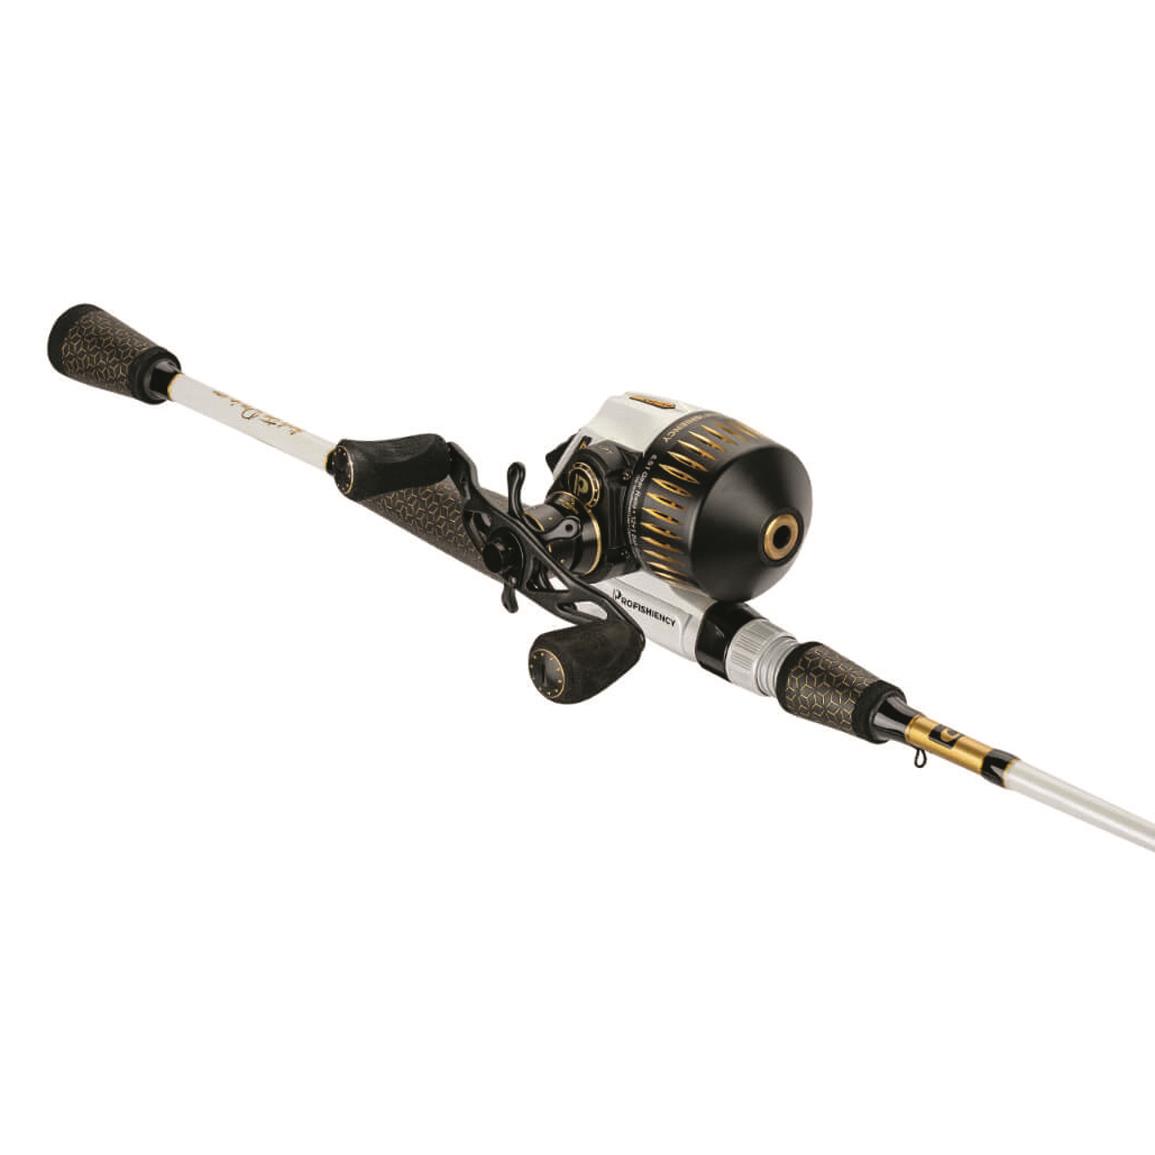 Ugly Stik GX2 5'6 Medium Spincast Youth Combo, 3.0:1, Right Hand - 732511, Spincast  Combos at Sportsman's Guide